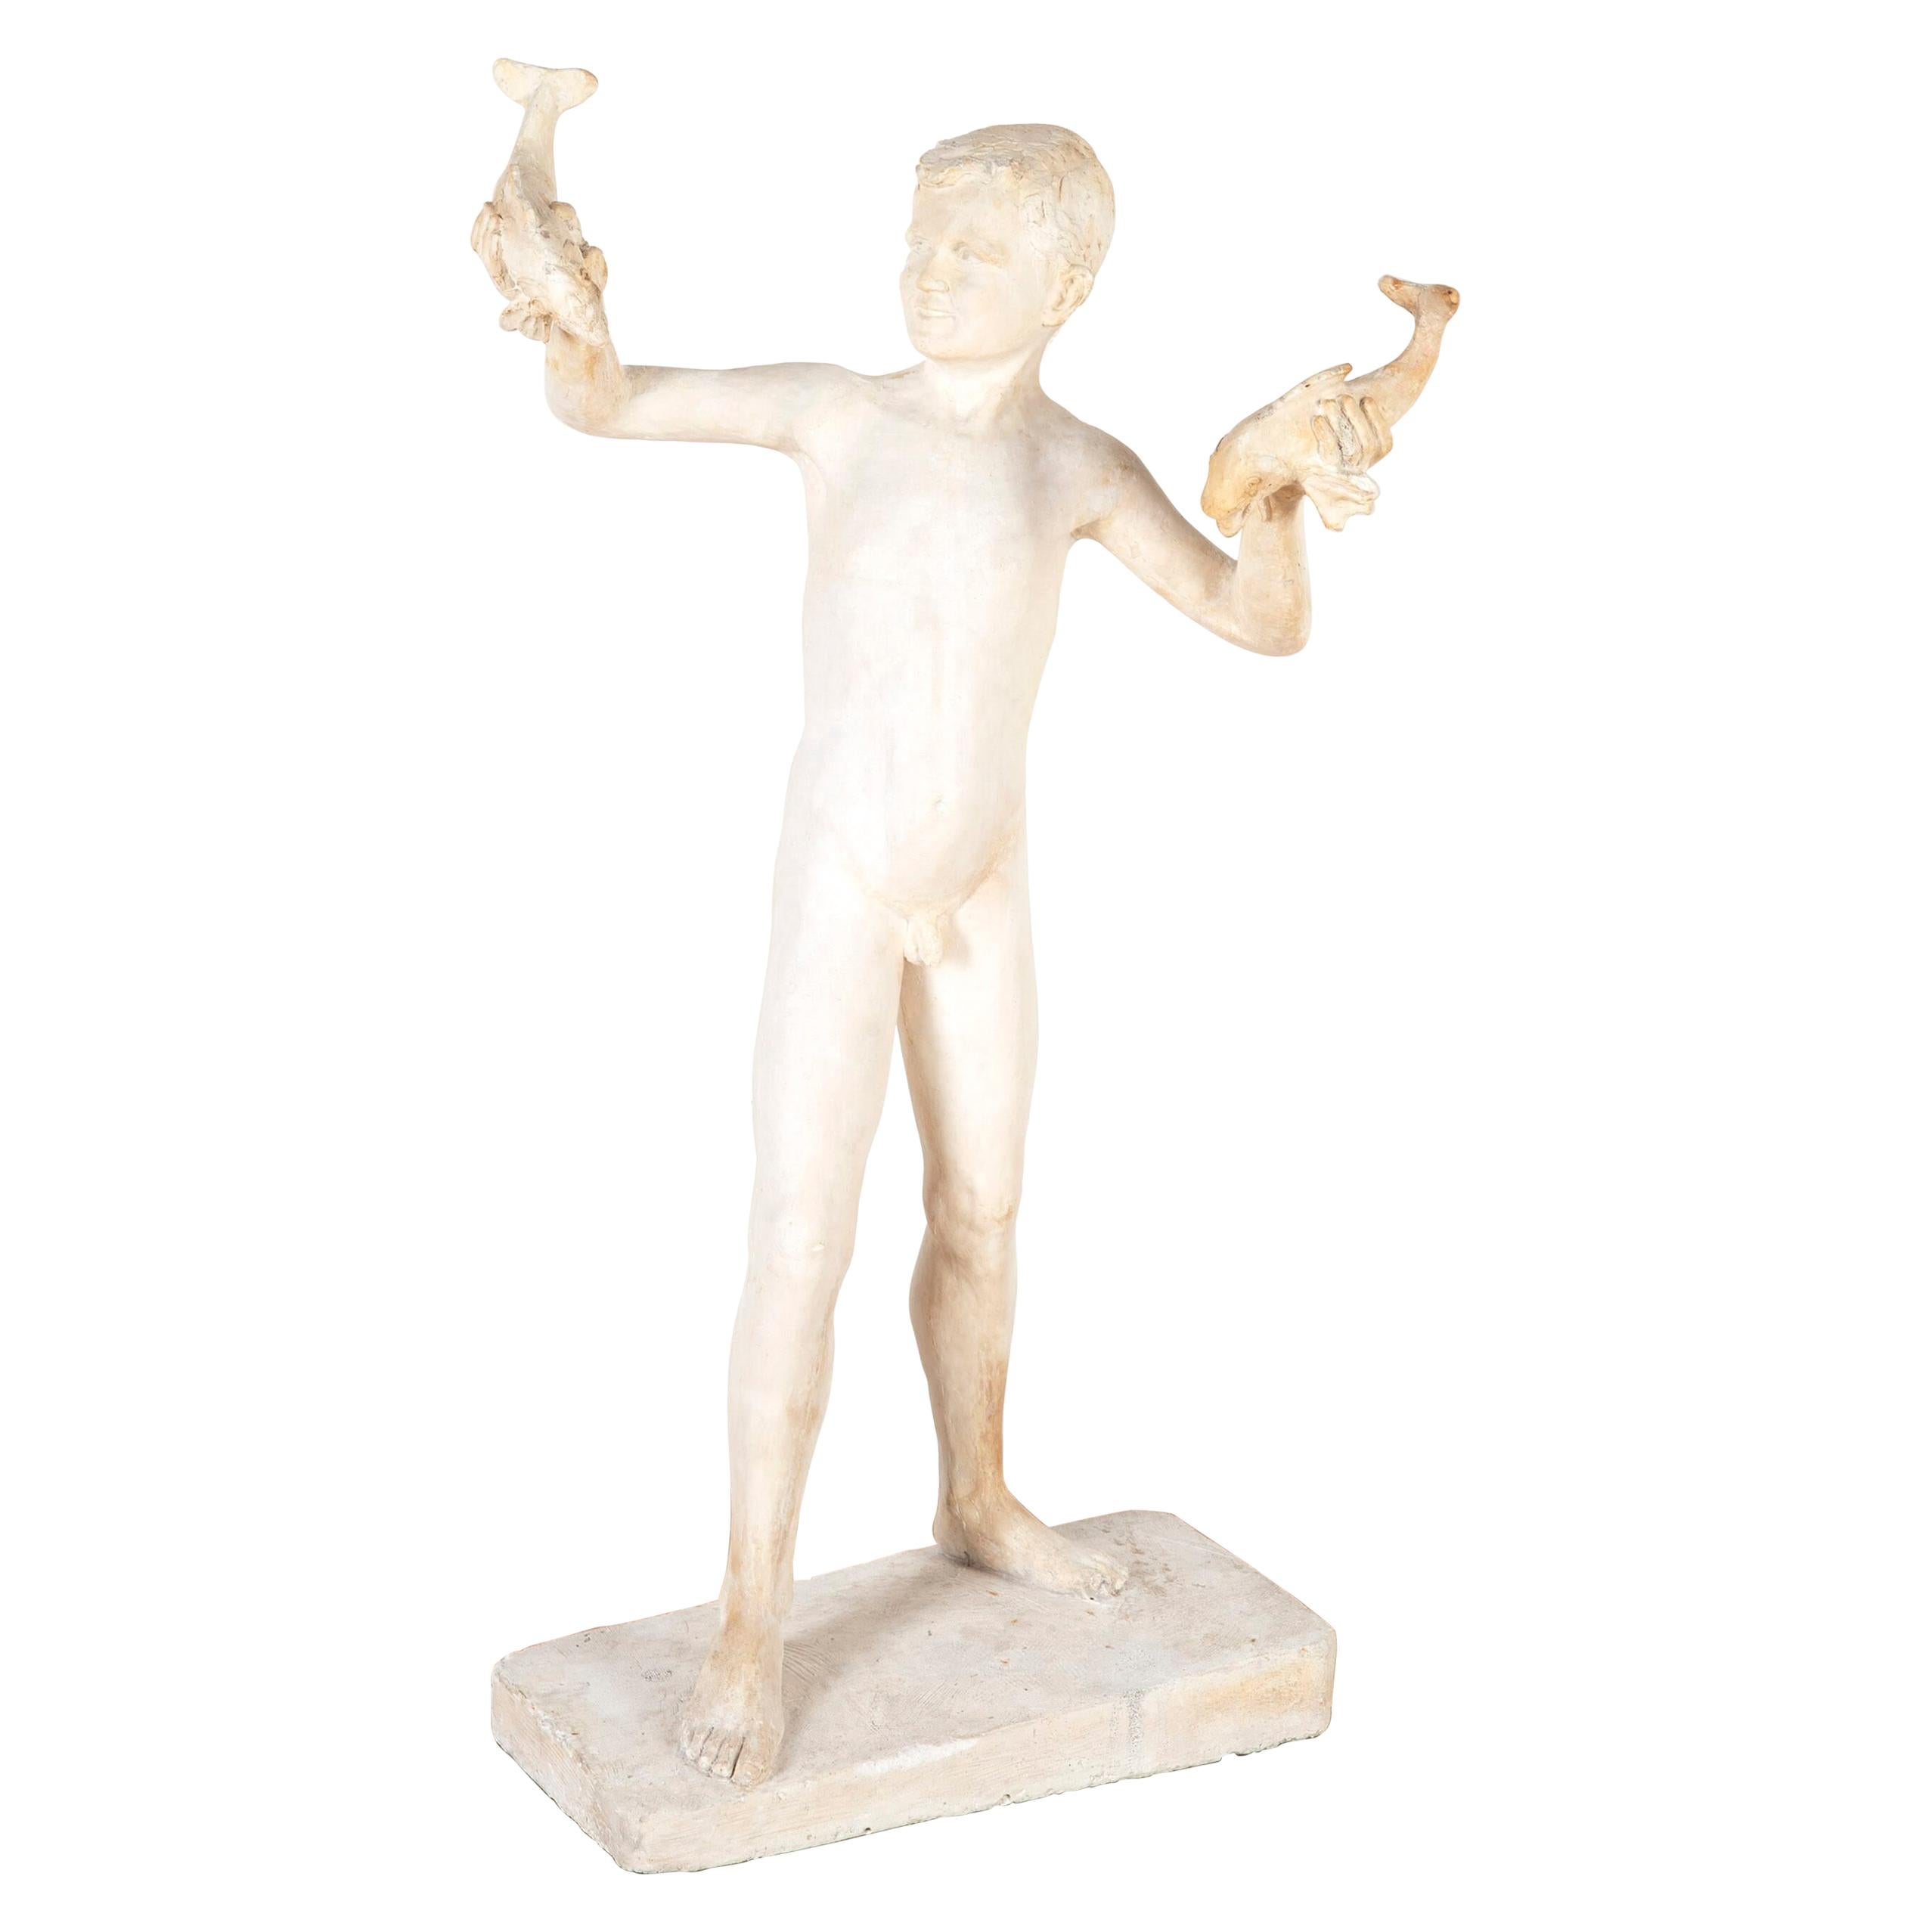 Plaster Maquette Sculpture of a Young Boy